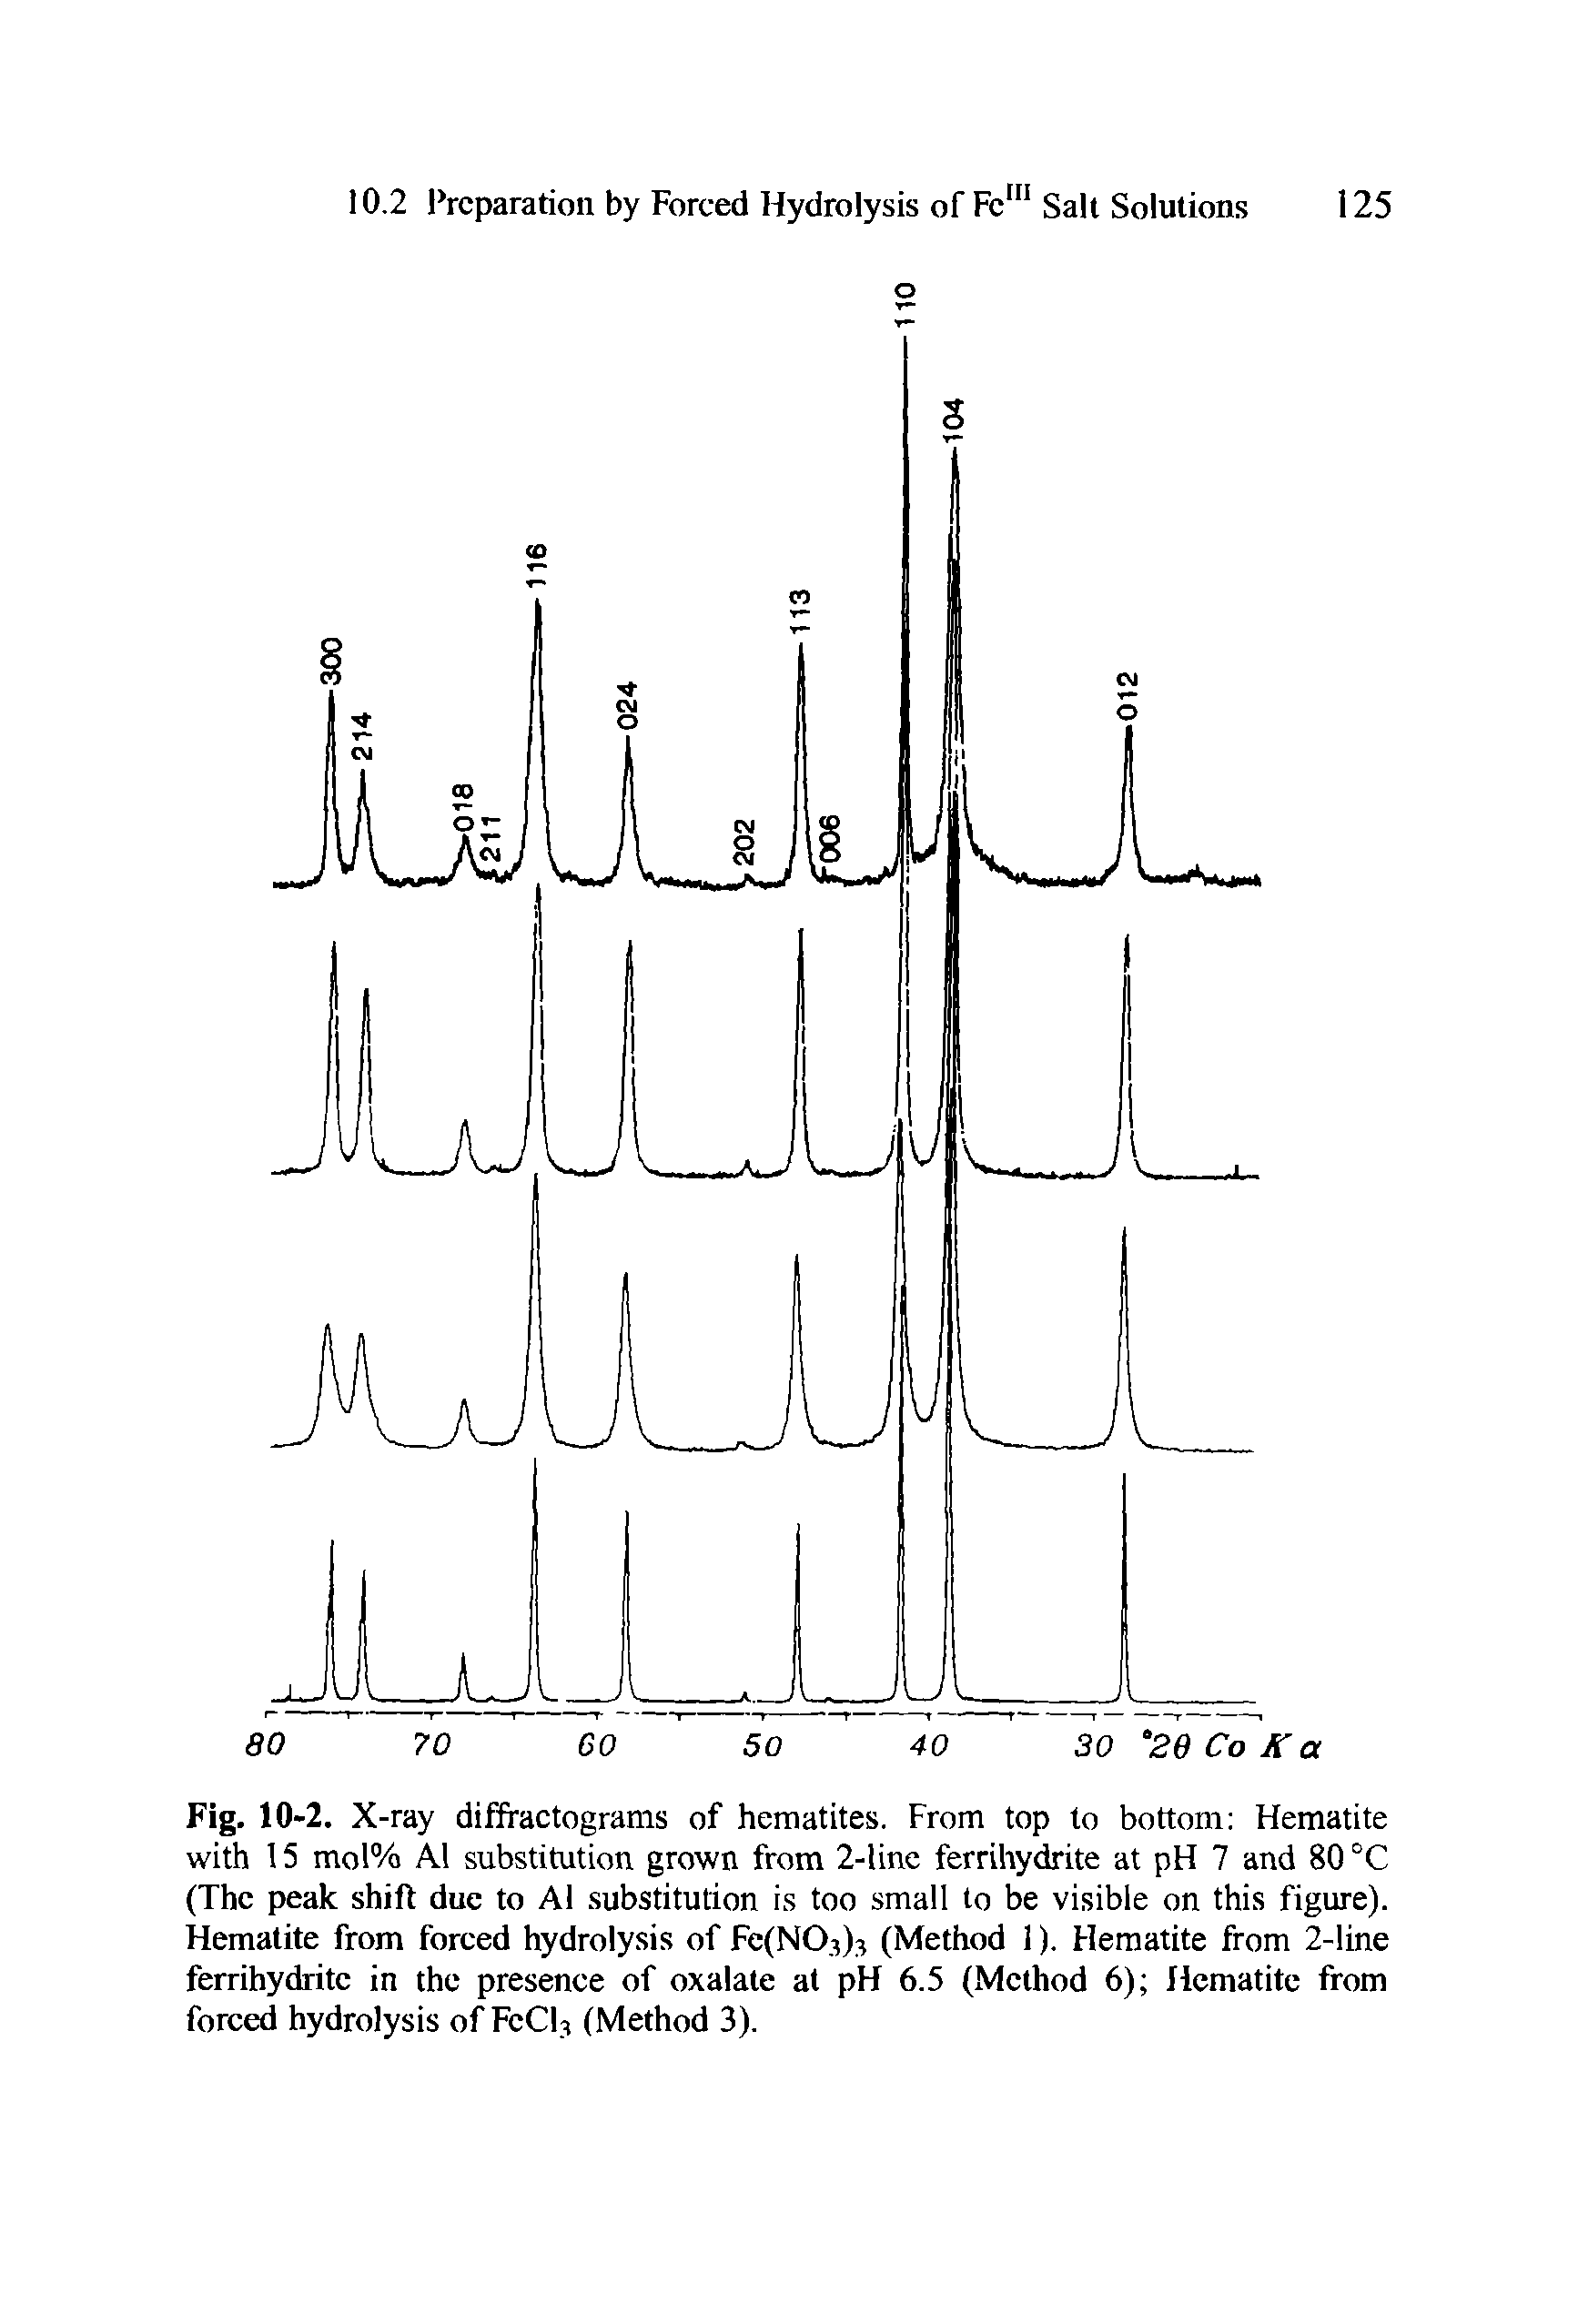 Fig. 10-2. X-ray diffractograms of hematites. From top to bottom Hematite with 15 mol% A1 substitution grown from 2-line ferrihydrite at pH 7 and 80 °C (The peak shift due to A1. substitution is too small to be visible on this figure). Hematite from forced hydrolysis of Fe(N03)3 (Method 1). Hematite from 2-line ferrihydrite in the presence of oxalate at pH 6.5 (Method 6) Hematite from forced hydrolysis of FCCI3 (Method 3).